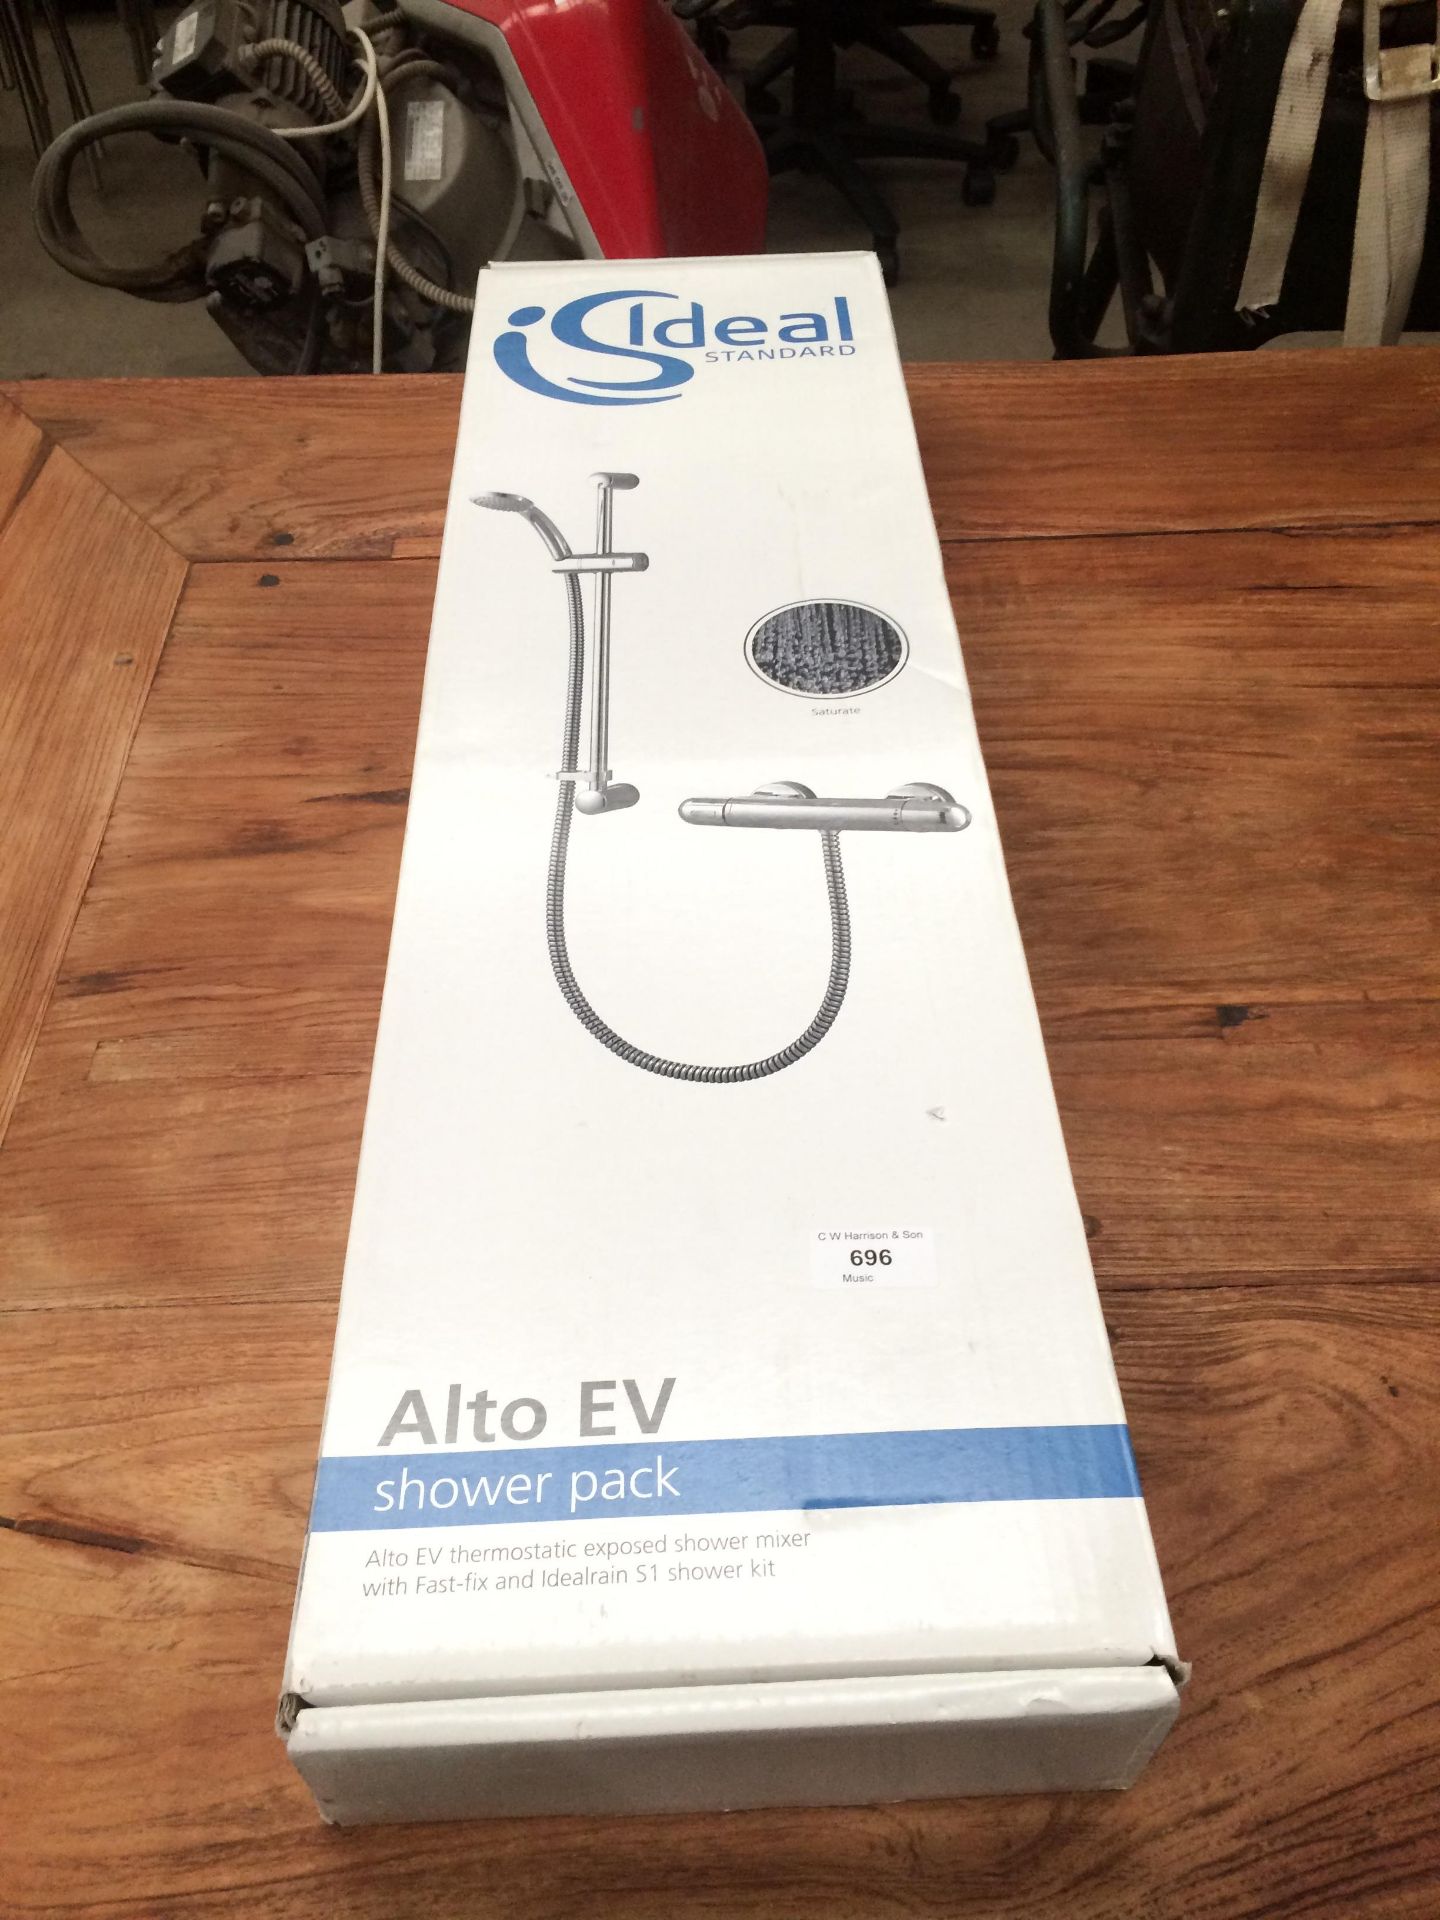 An Ideal Standard Alto EV thermostatic exposed shower mixer with Fast Fix and Ideal Rain shower kit